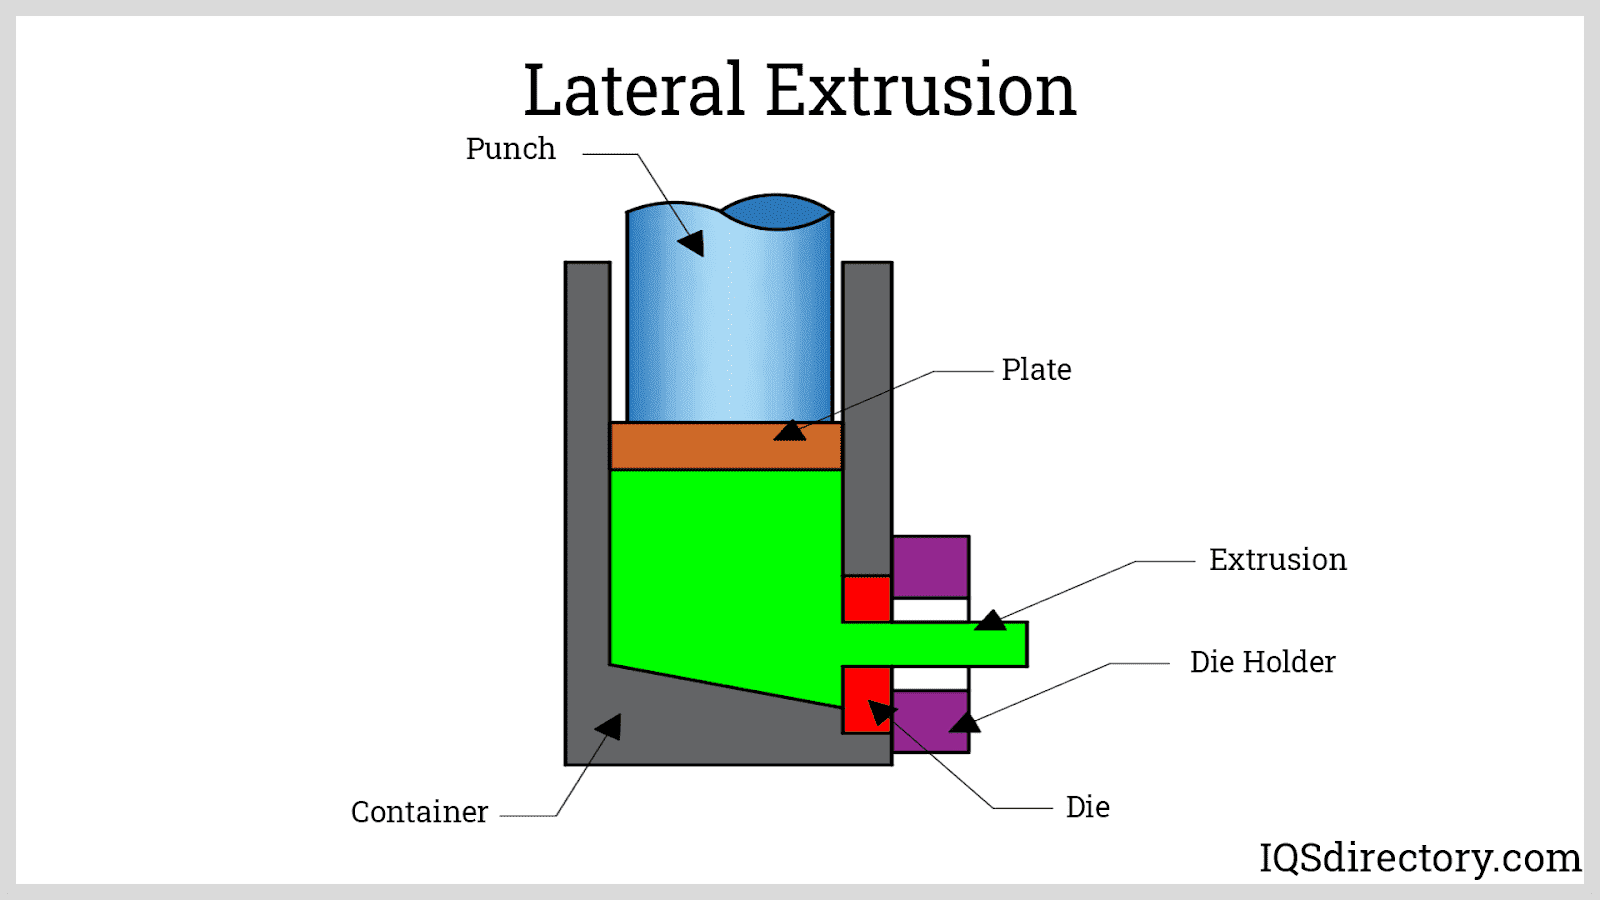 Lateral Extrusion